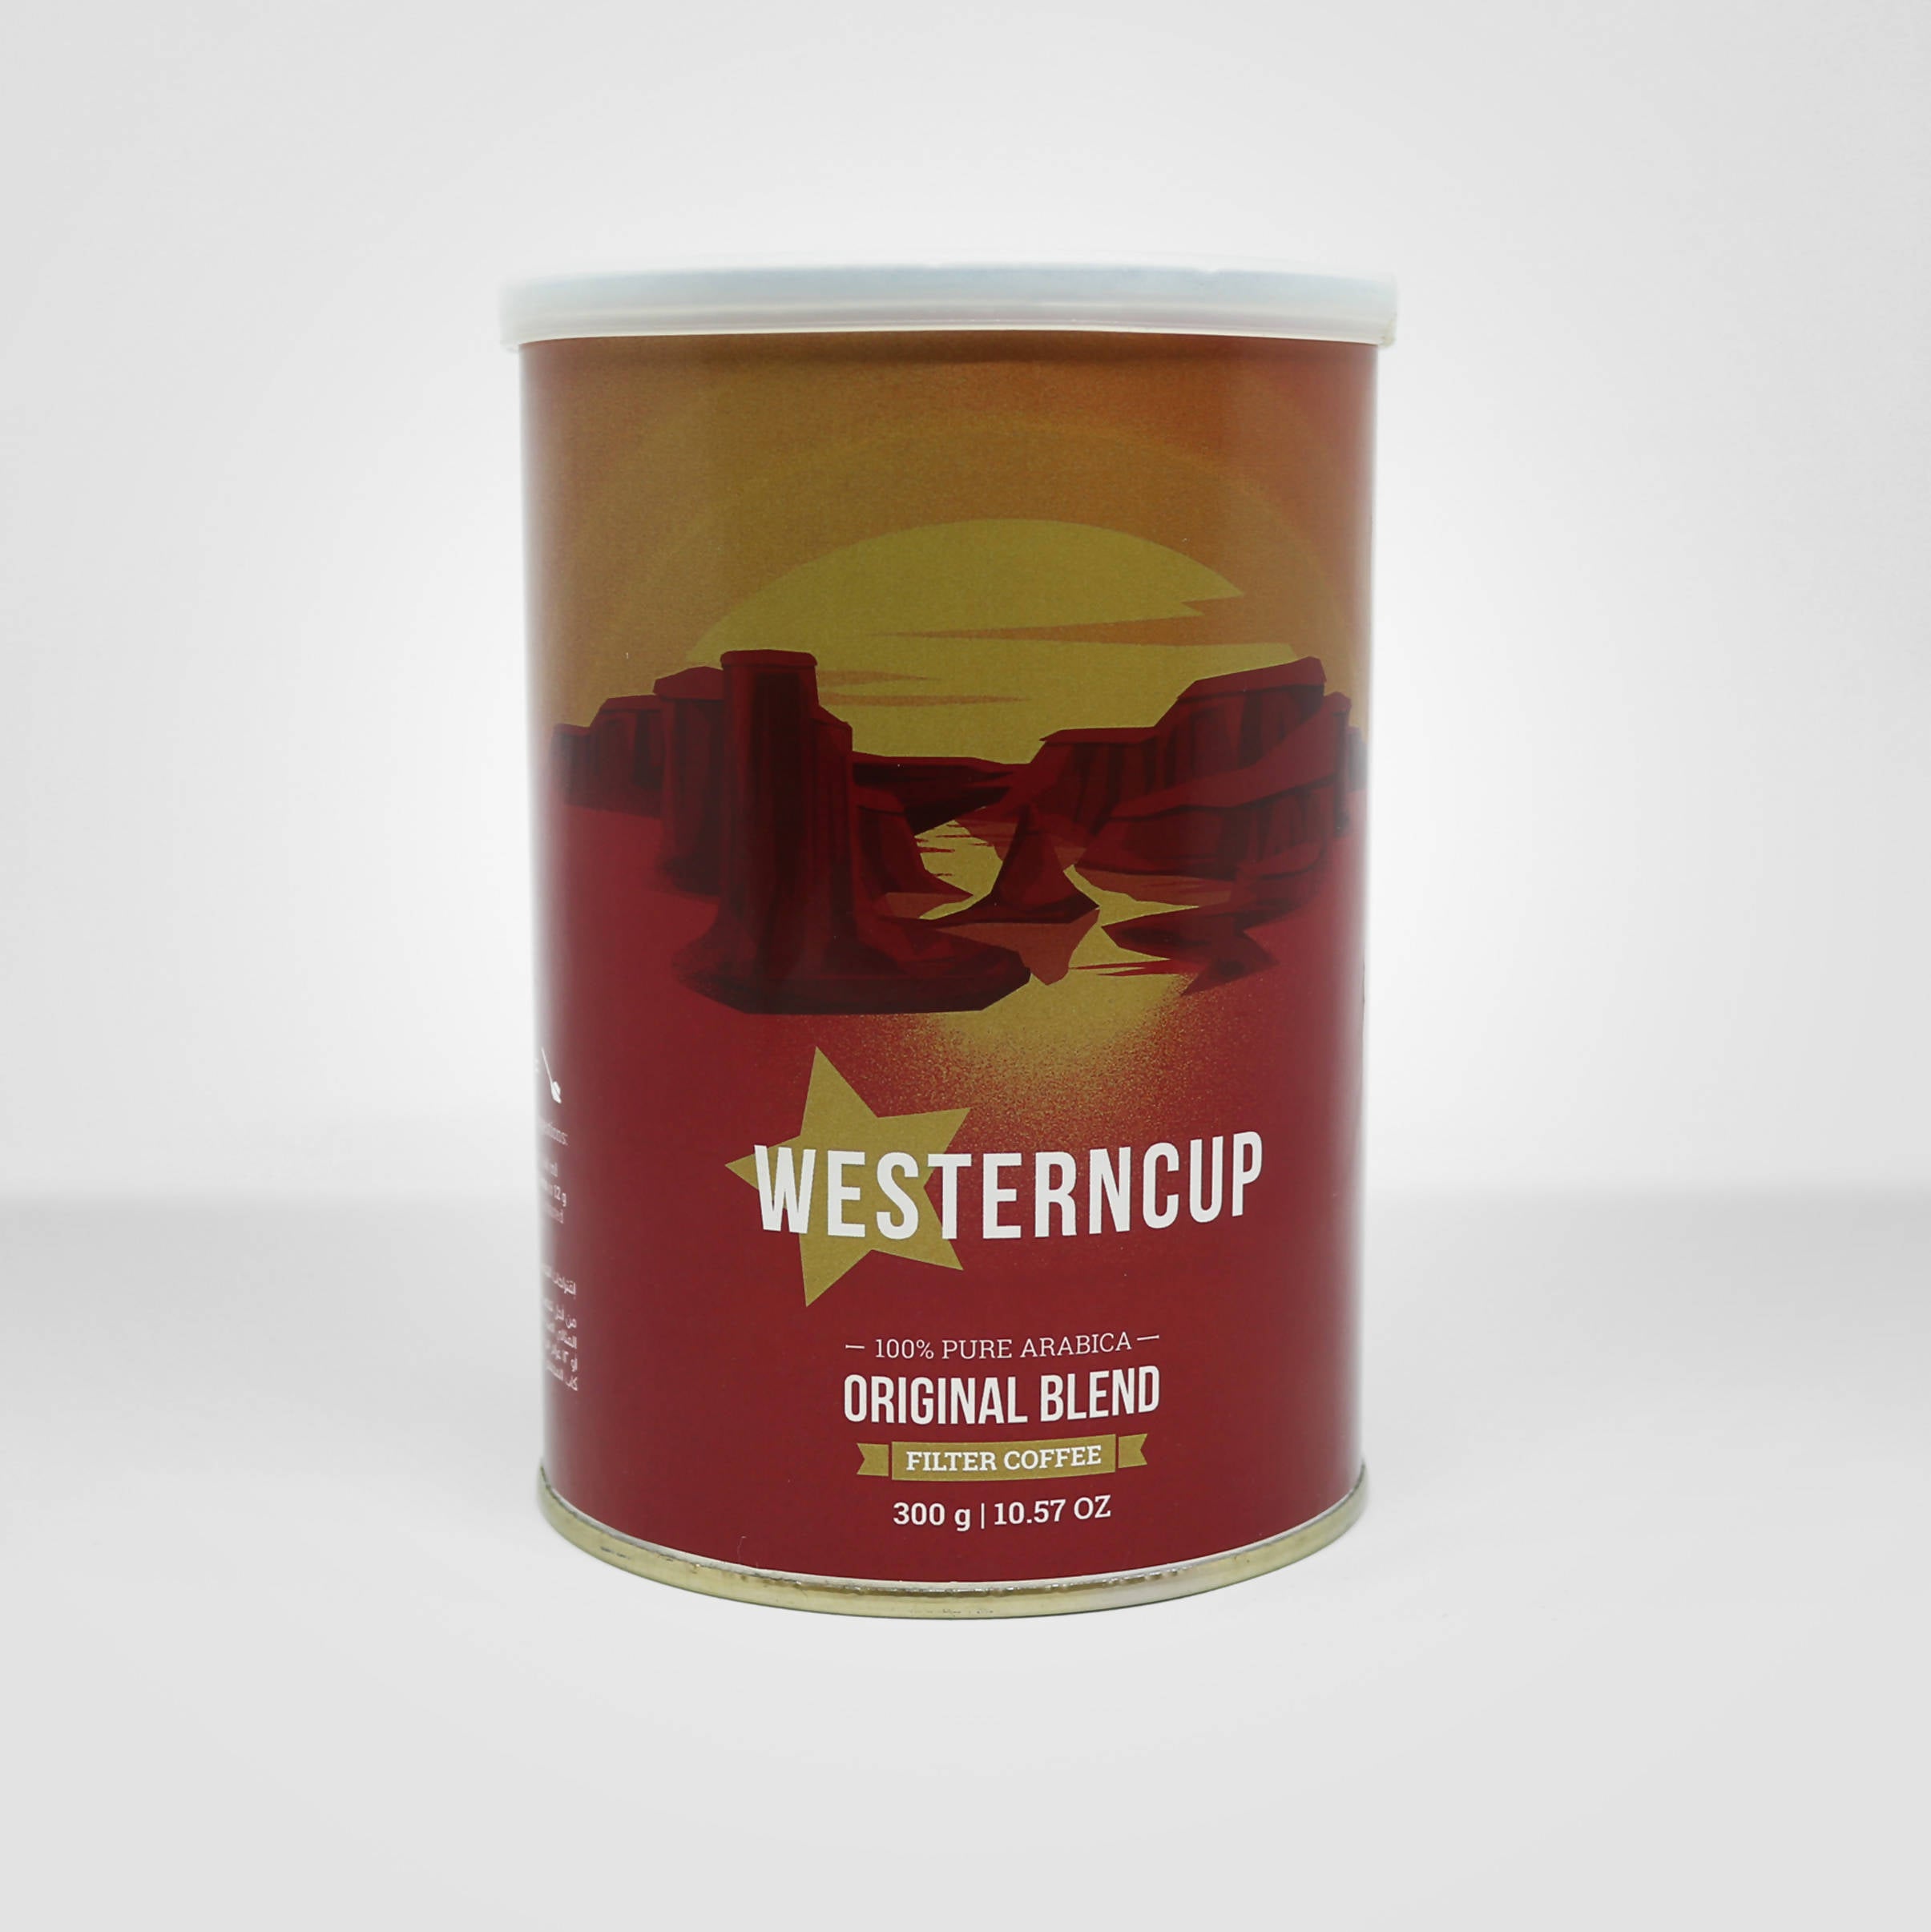 THE WESTERN CUP filter coffee 300g can